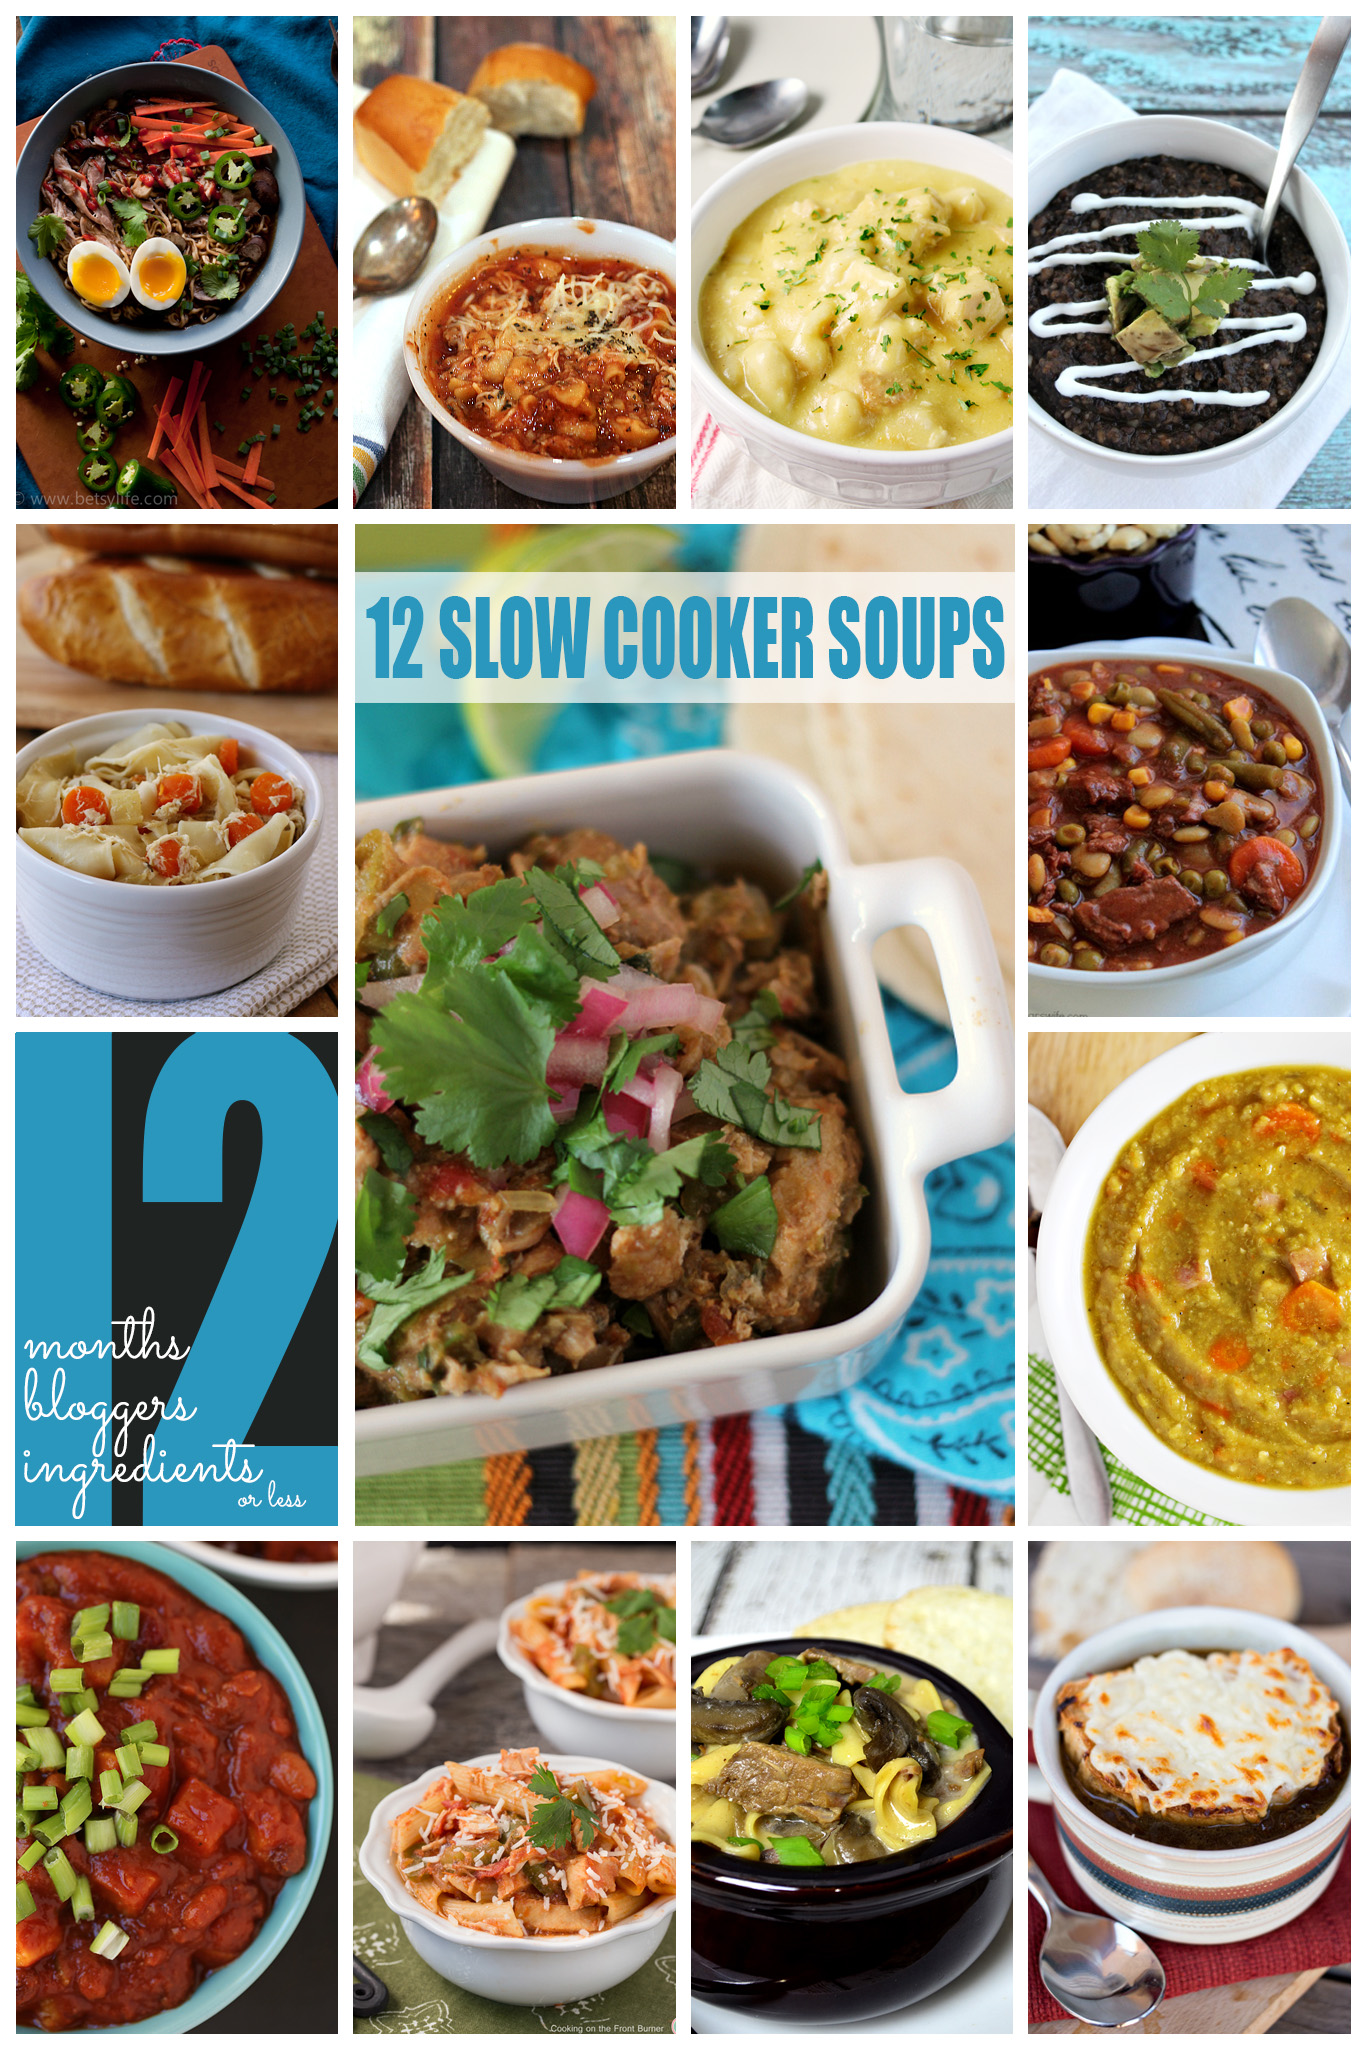 12 Slow Cooker Soups by #12Bloggers